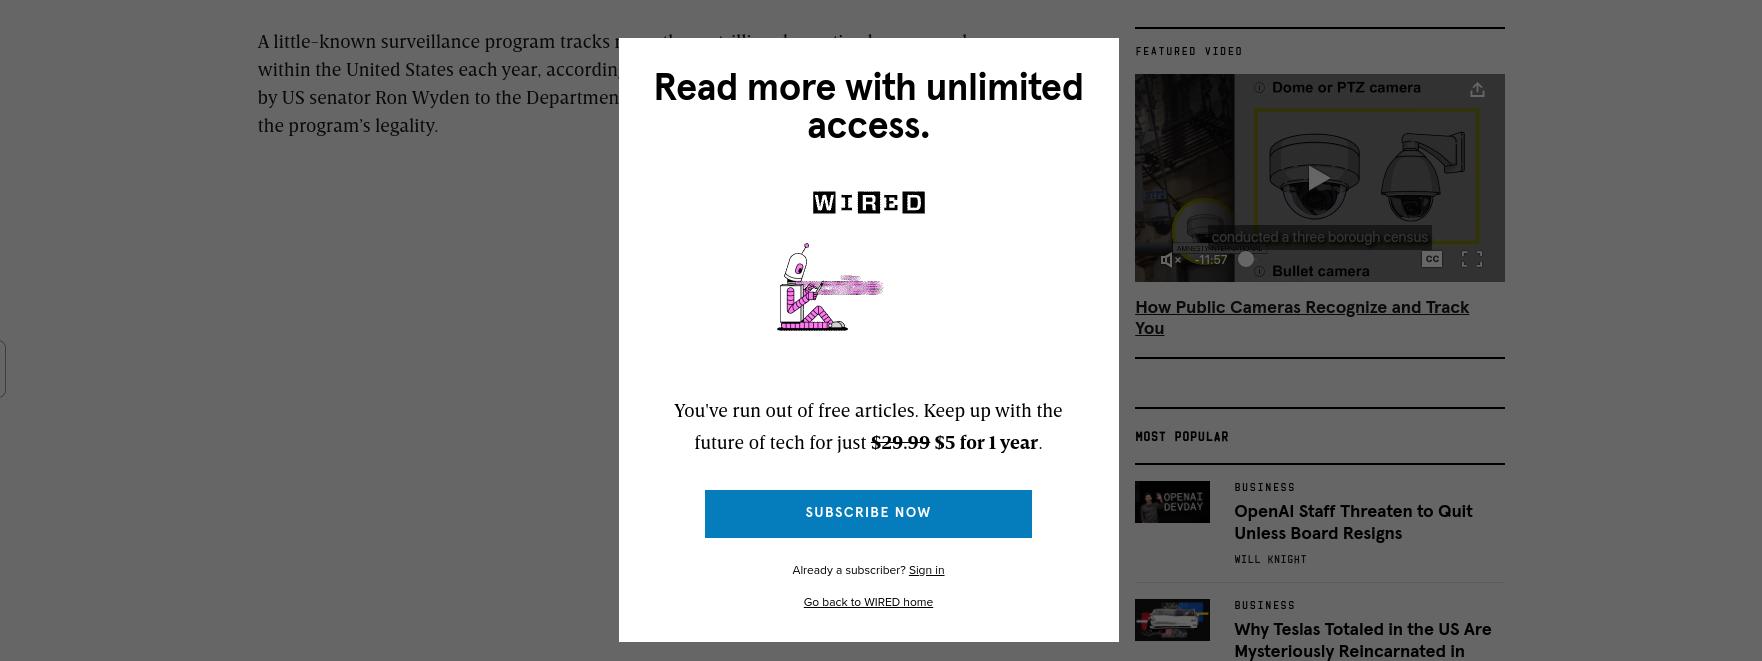 Wired paywall stating: Read more with unlimited access. Image You've run out of free articles. Keep up with the future of tech for just $29.99 $5 for 1 year.